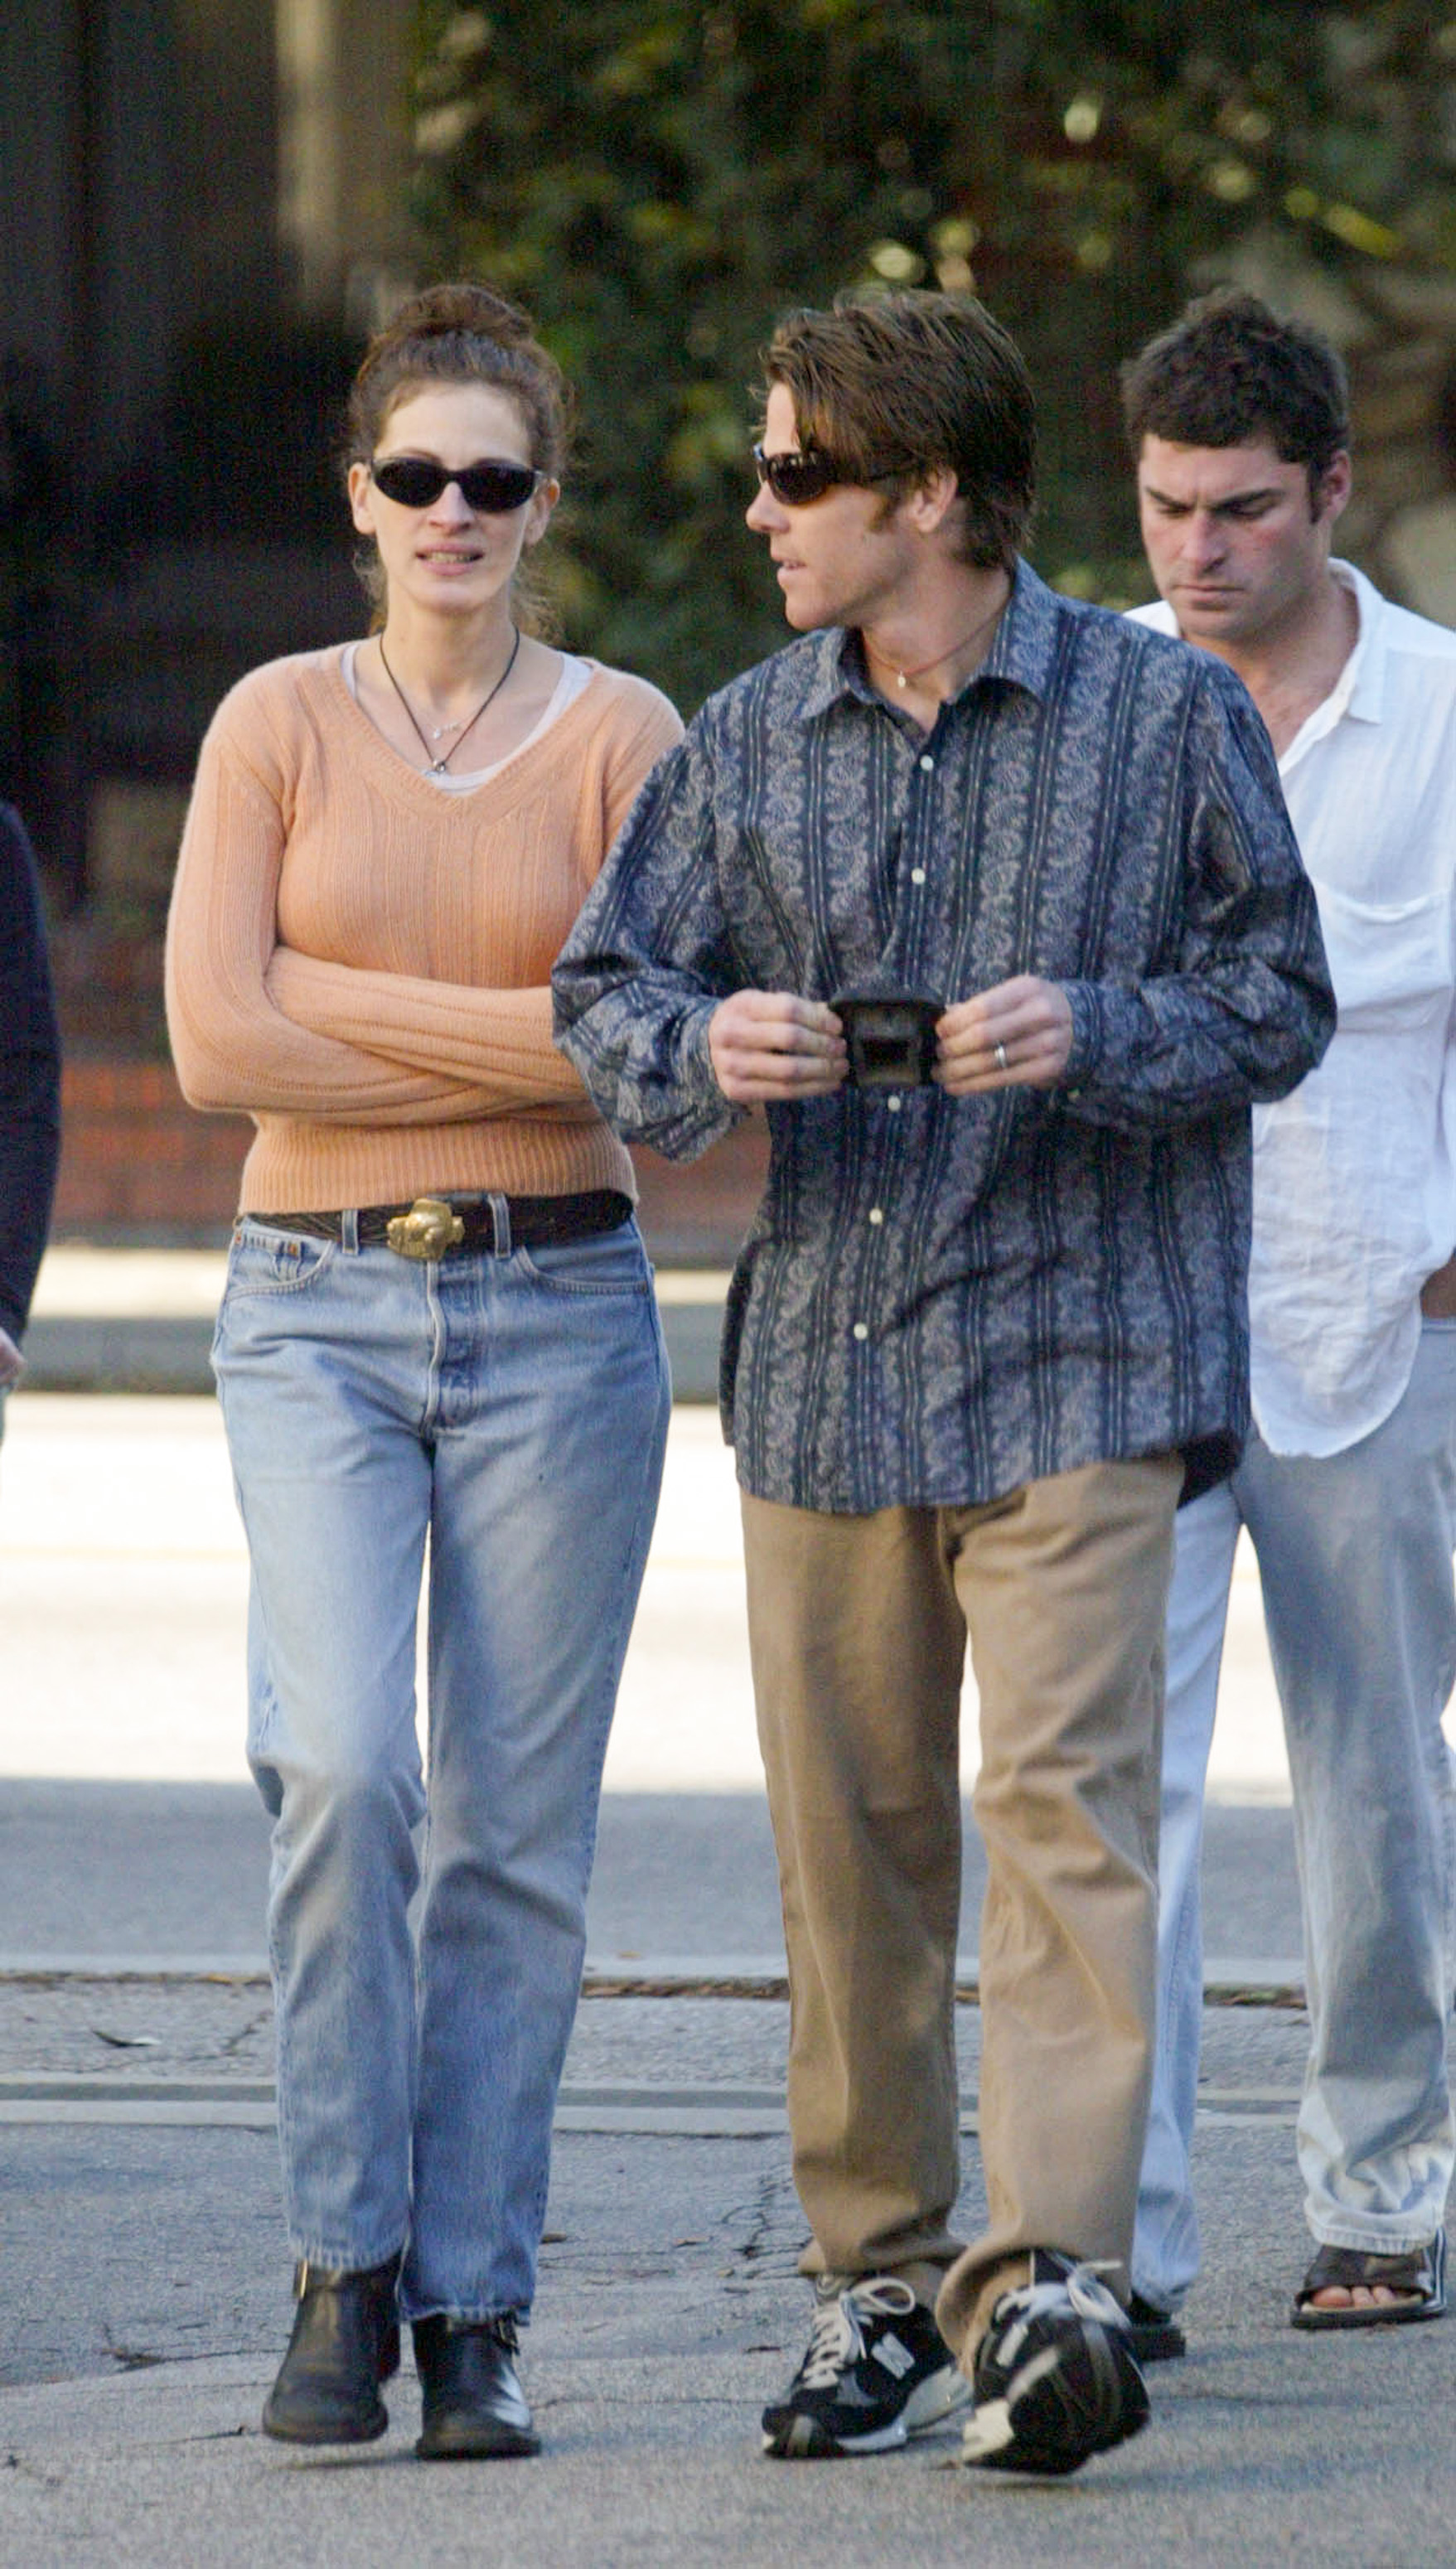 Julia Roberts and Danny Moder seen going for a walk in Los Angeles, 2002 | Source: Getty Images